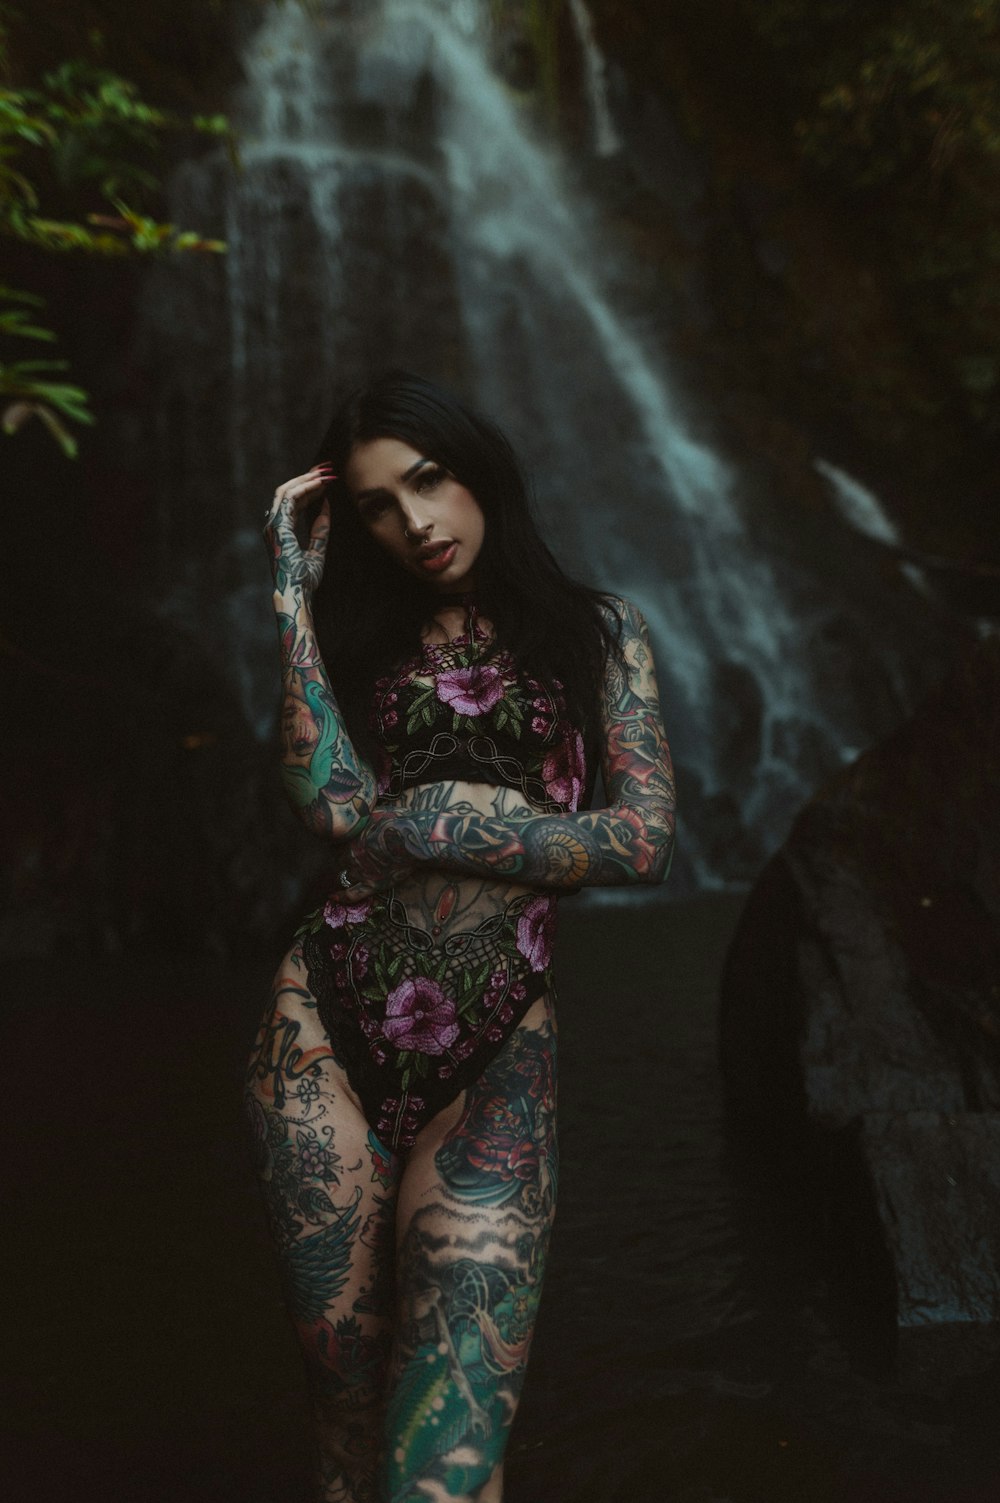 a woman with tattoos standing in front of a waterfall